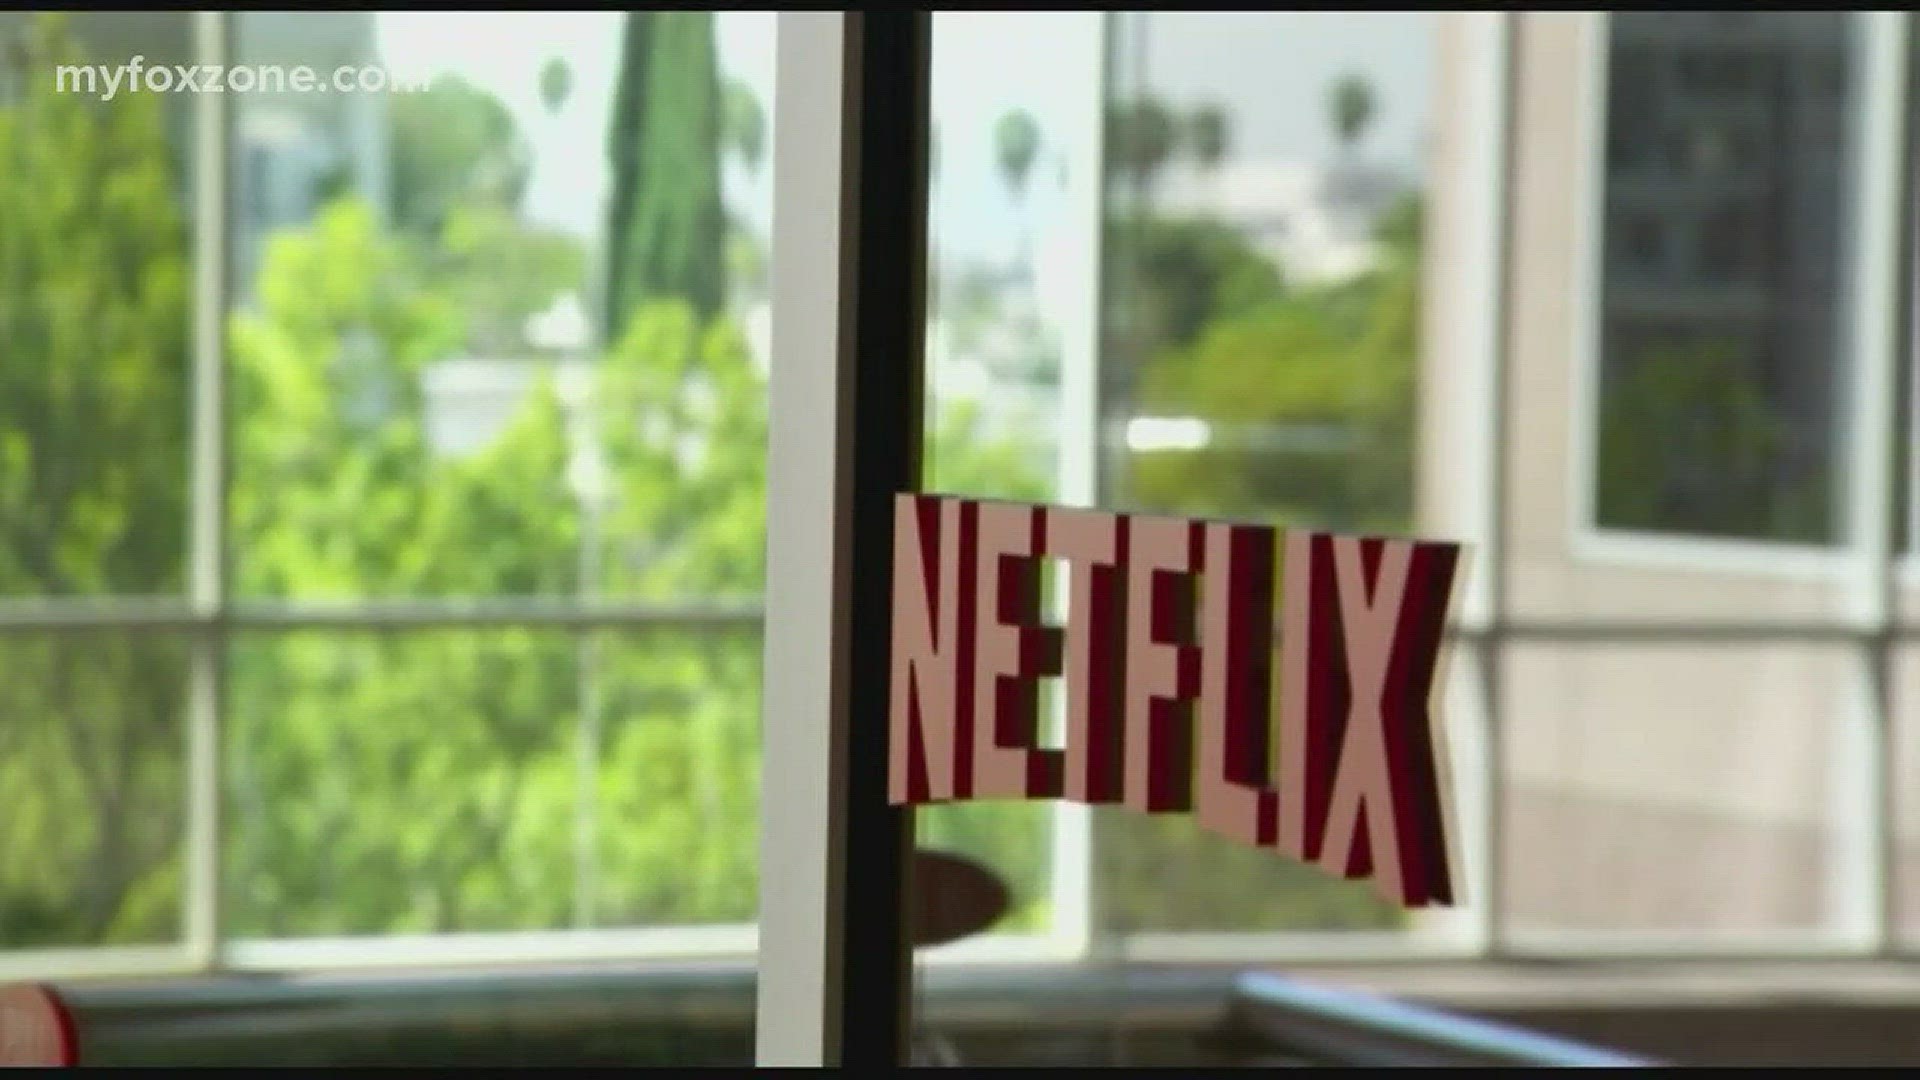 Our Malik Mingo gives you details on a new partnership between Netflix and Sirius XM.